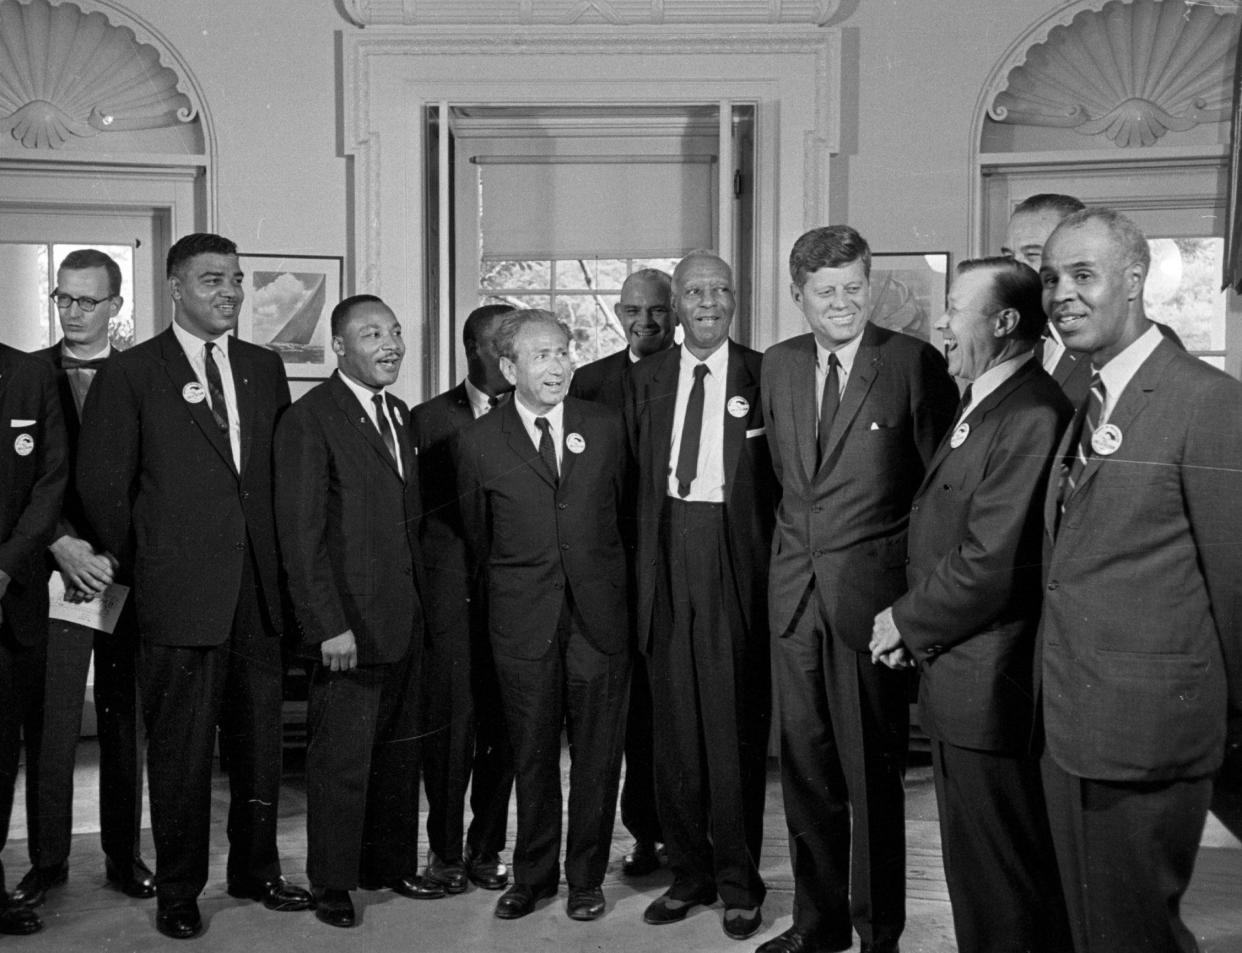 After the 1963 March on Washington, President John F. Kennedy met with civil rights leaders involved in the historic event, including Dr. Martin Luther King (from Kennedy's right), John Lewis and A. Philip Randolph, then AFL-CIO vice president.